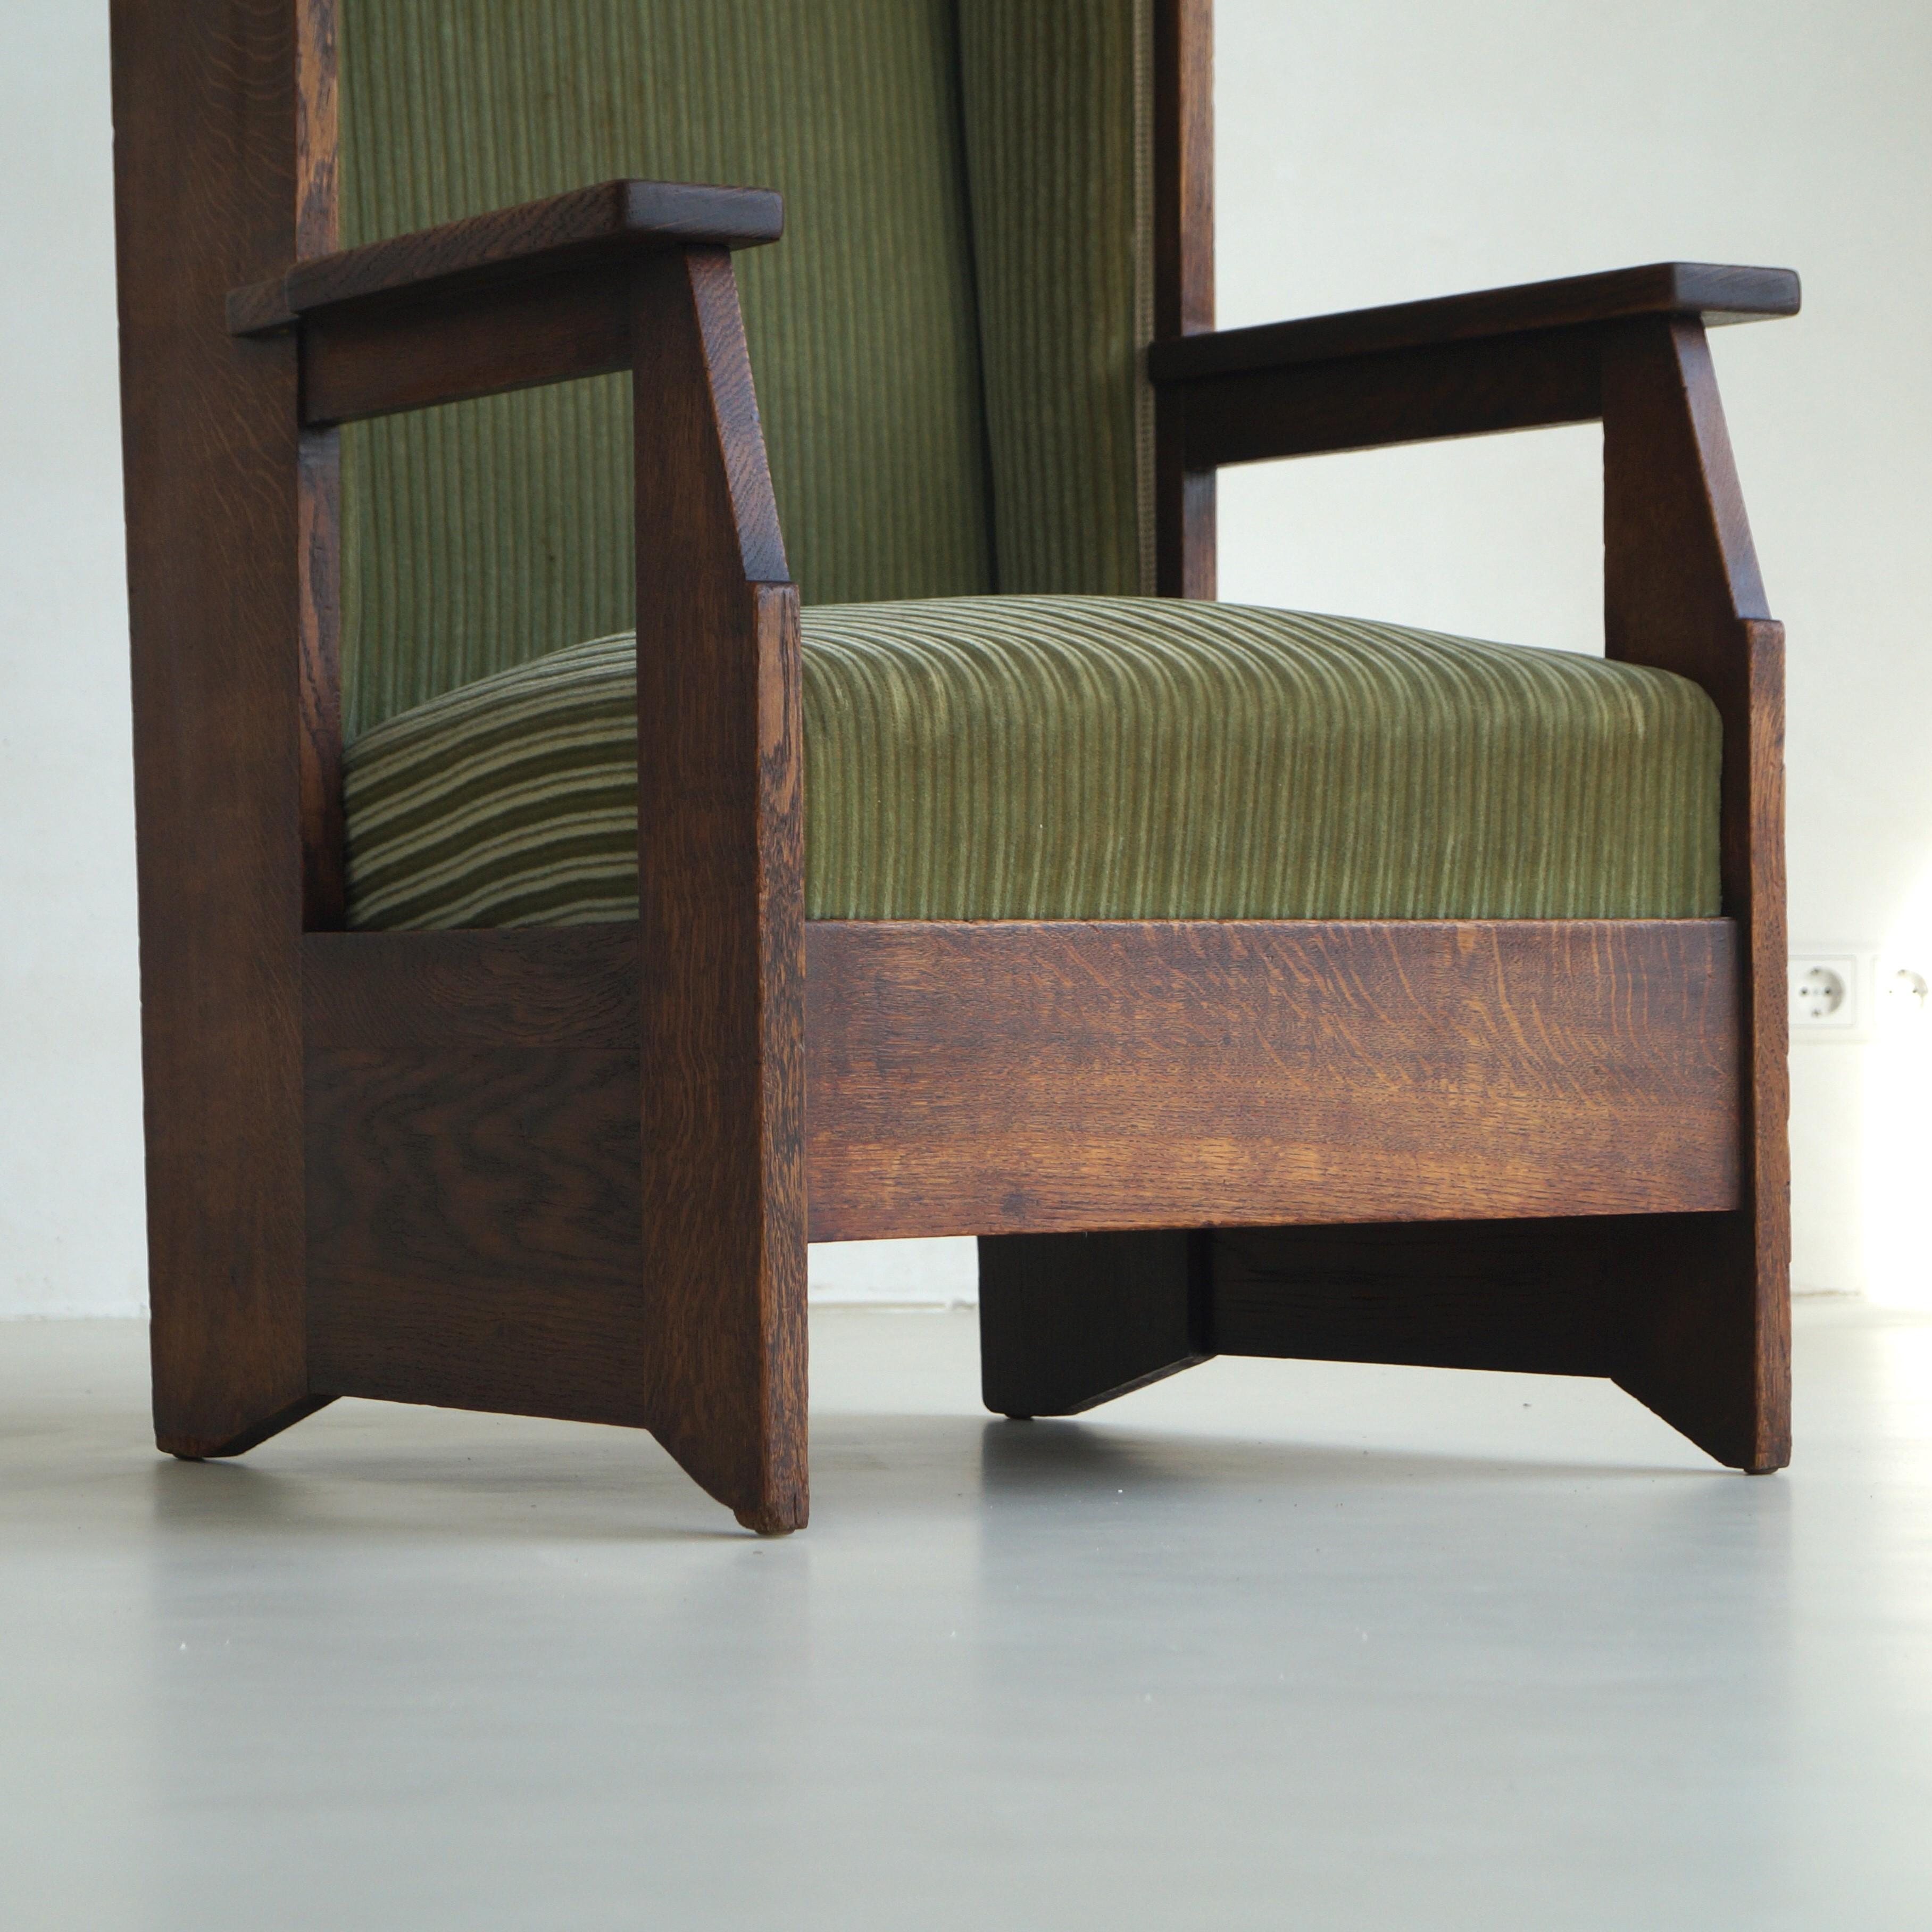 Dutch Art Deco Haagse School high back chair by Hendrik Wouda for Pander, 1924 For Sale 7